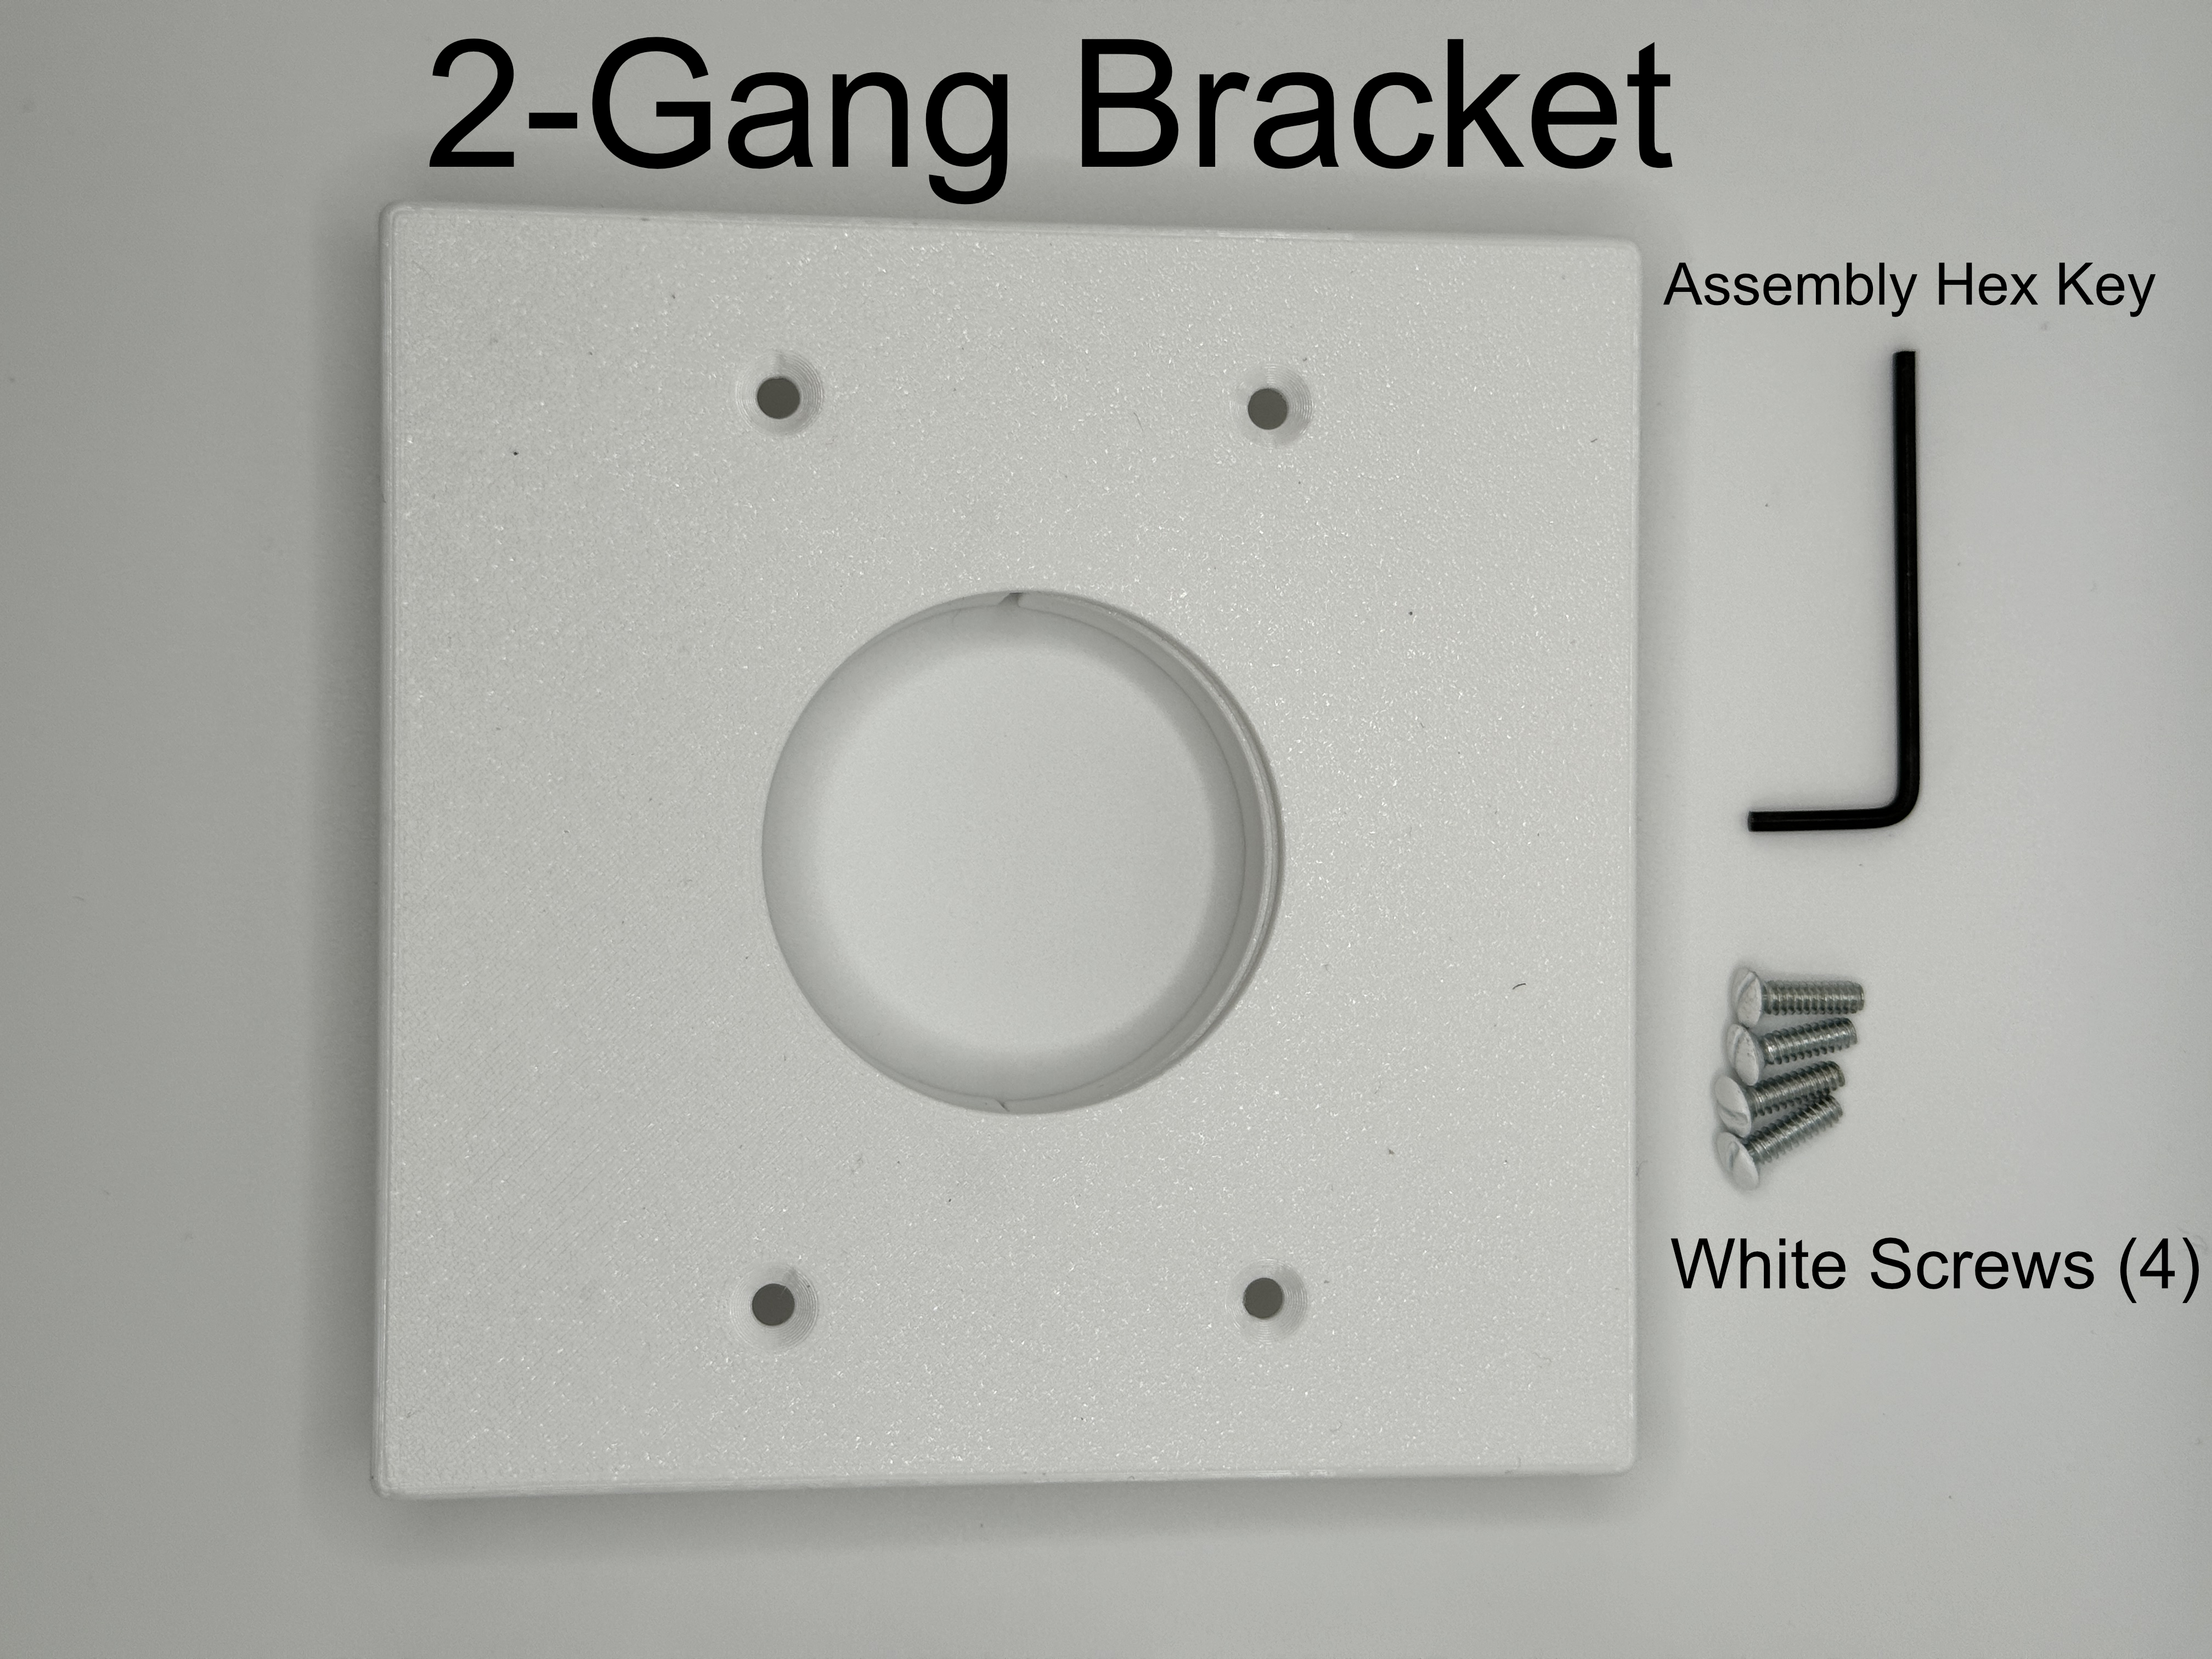 Camera mount comes with 4 white screws to match the color of the bracket along with an installation hex wrench